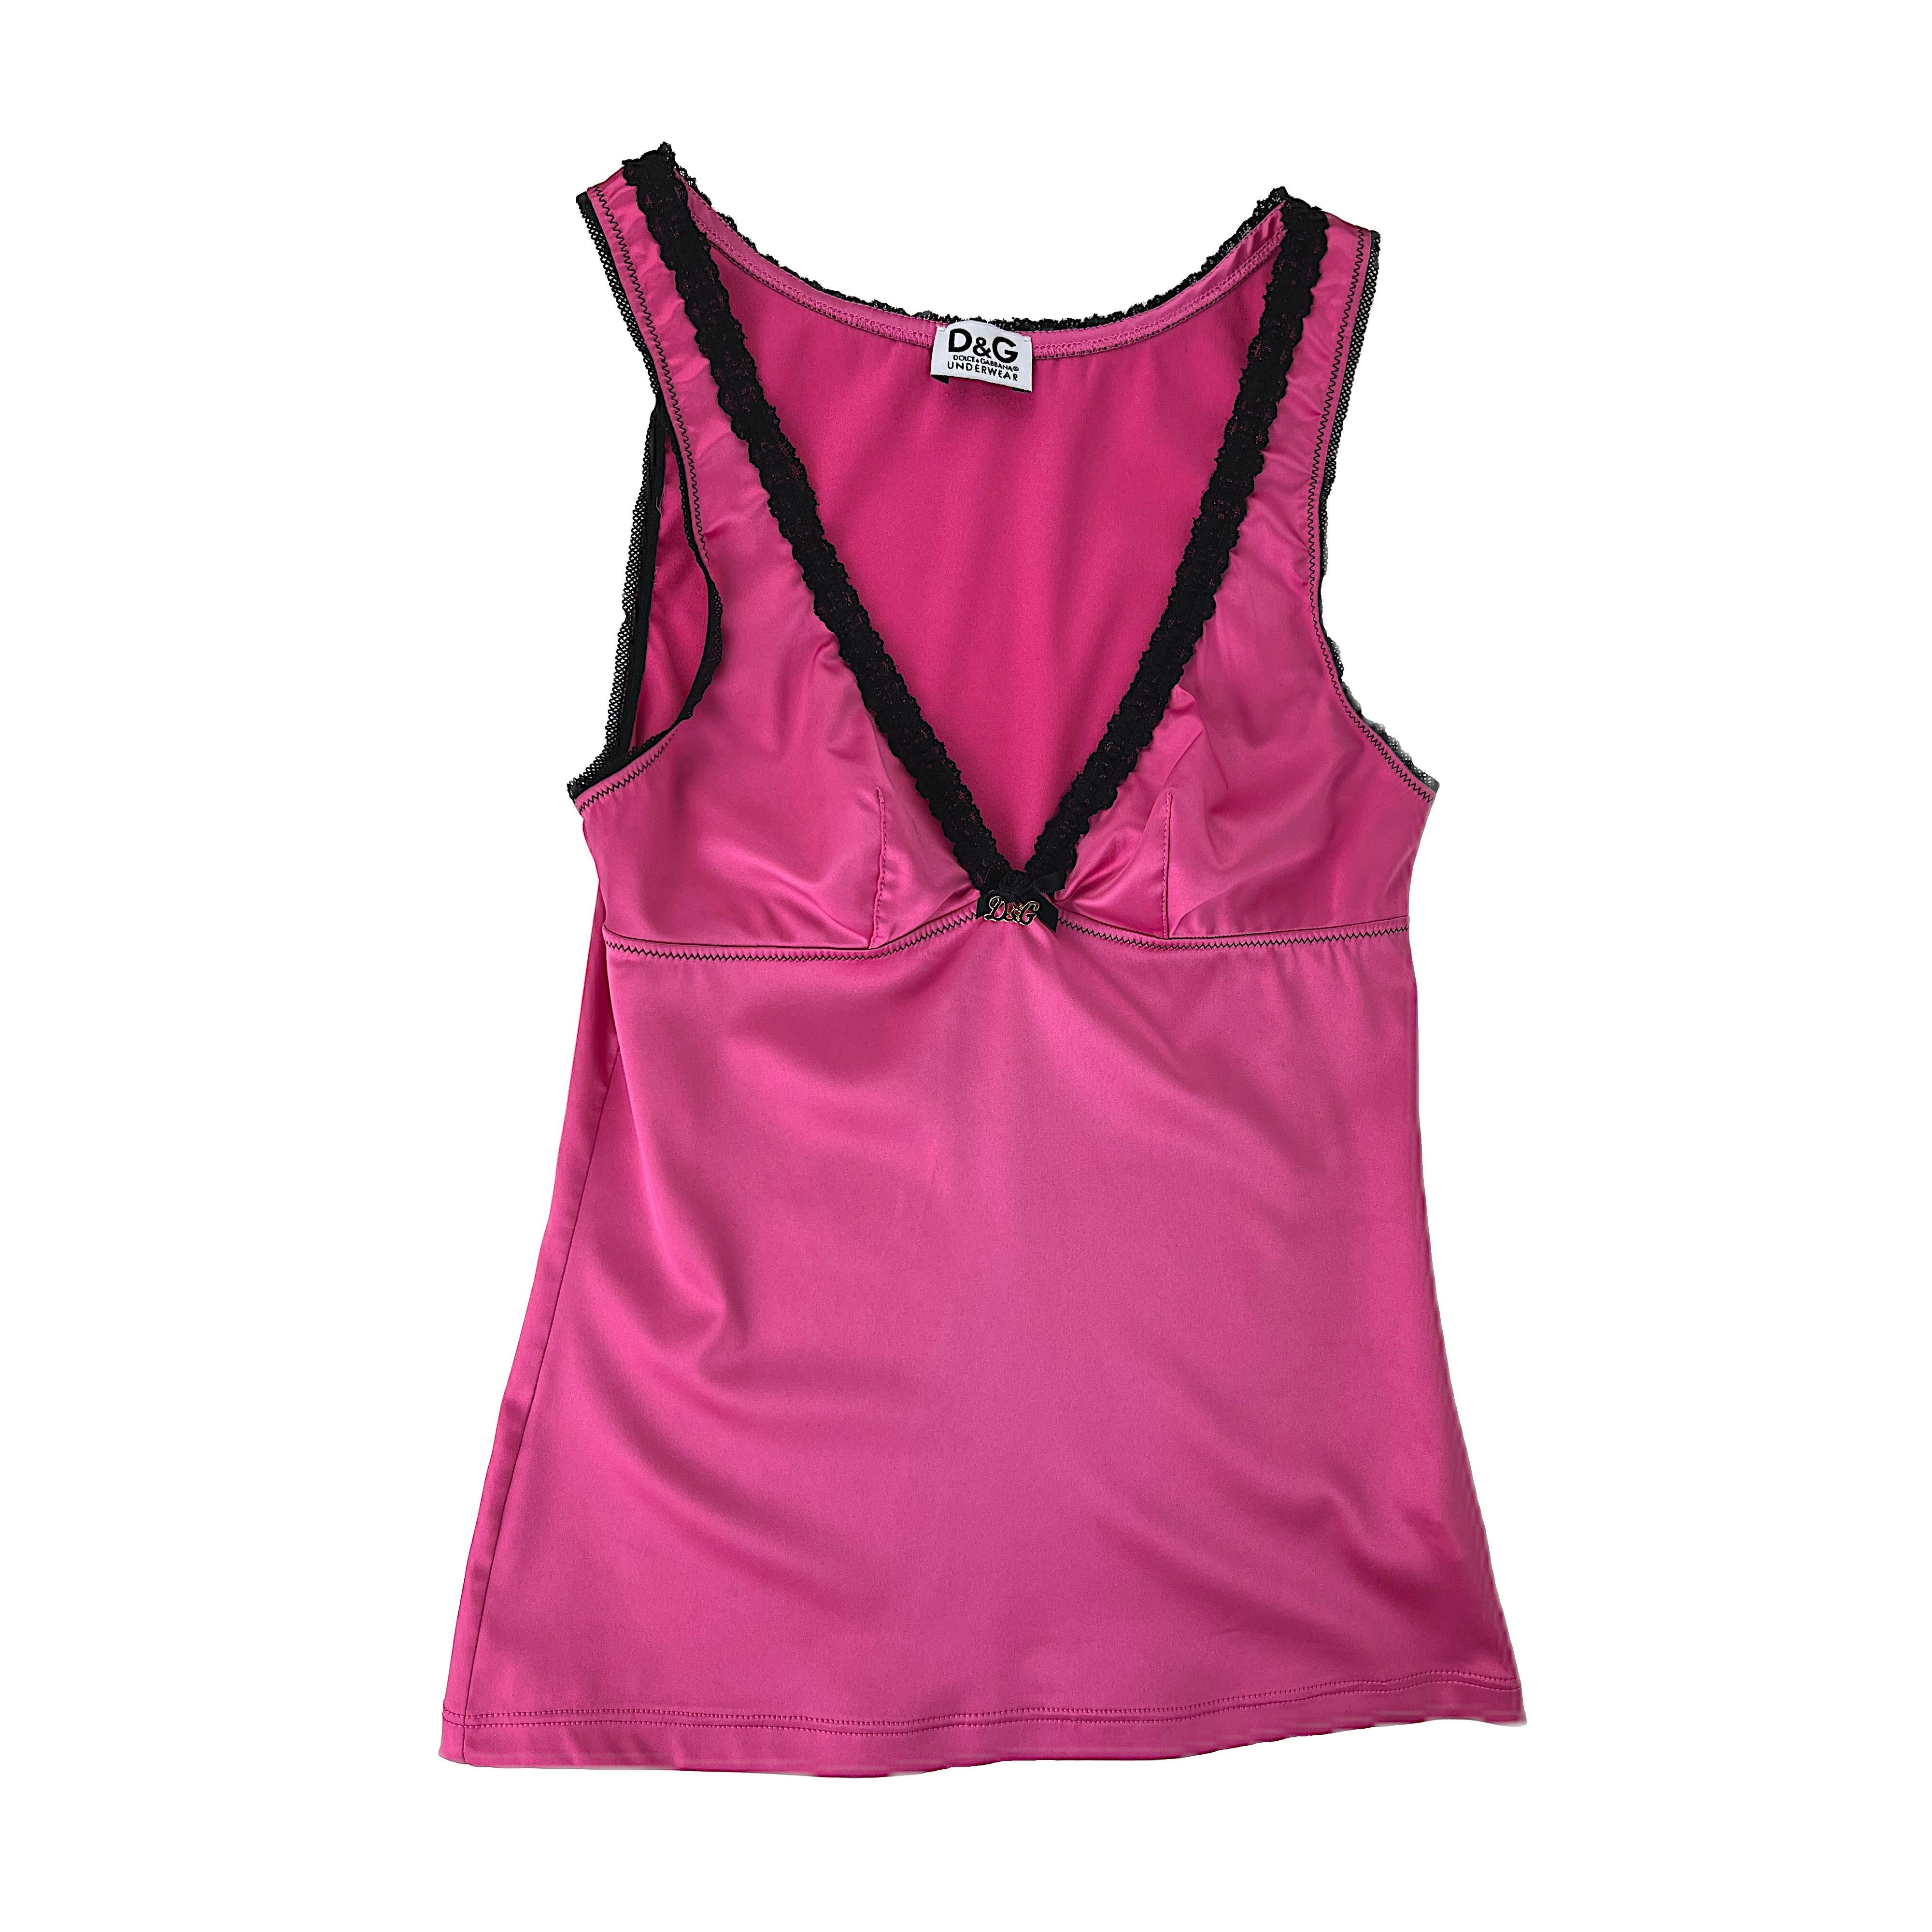 Women's DOLCE&GABBANA – Authentic Sexy Pink Tank Top with Black Lace and Golden Monogram